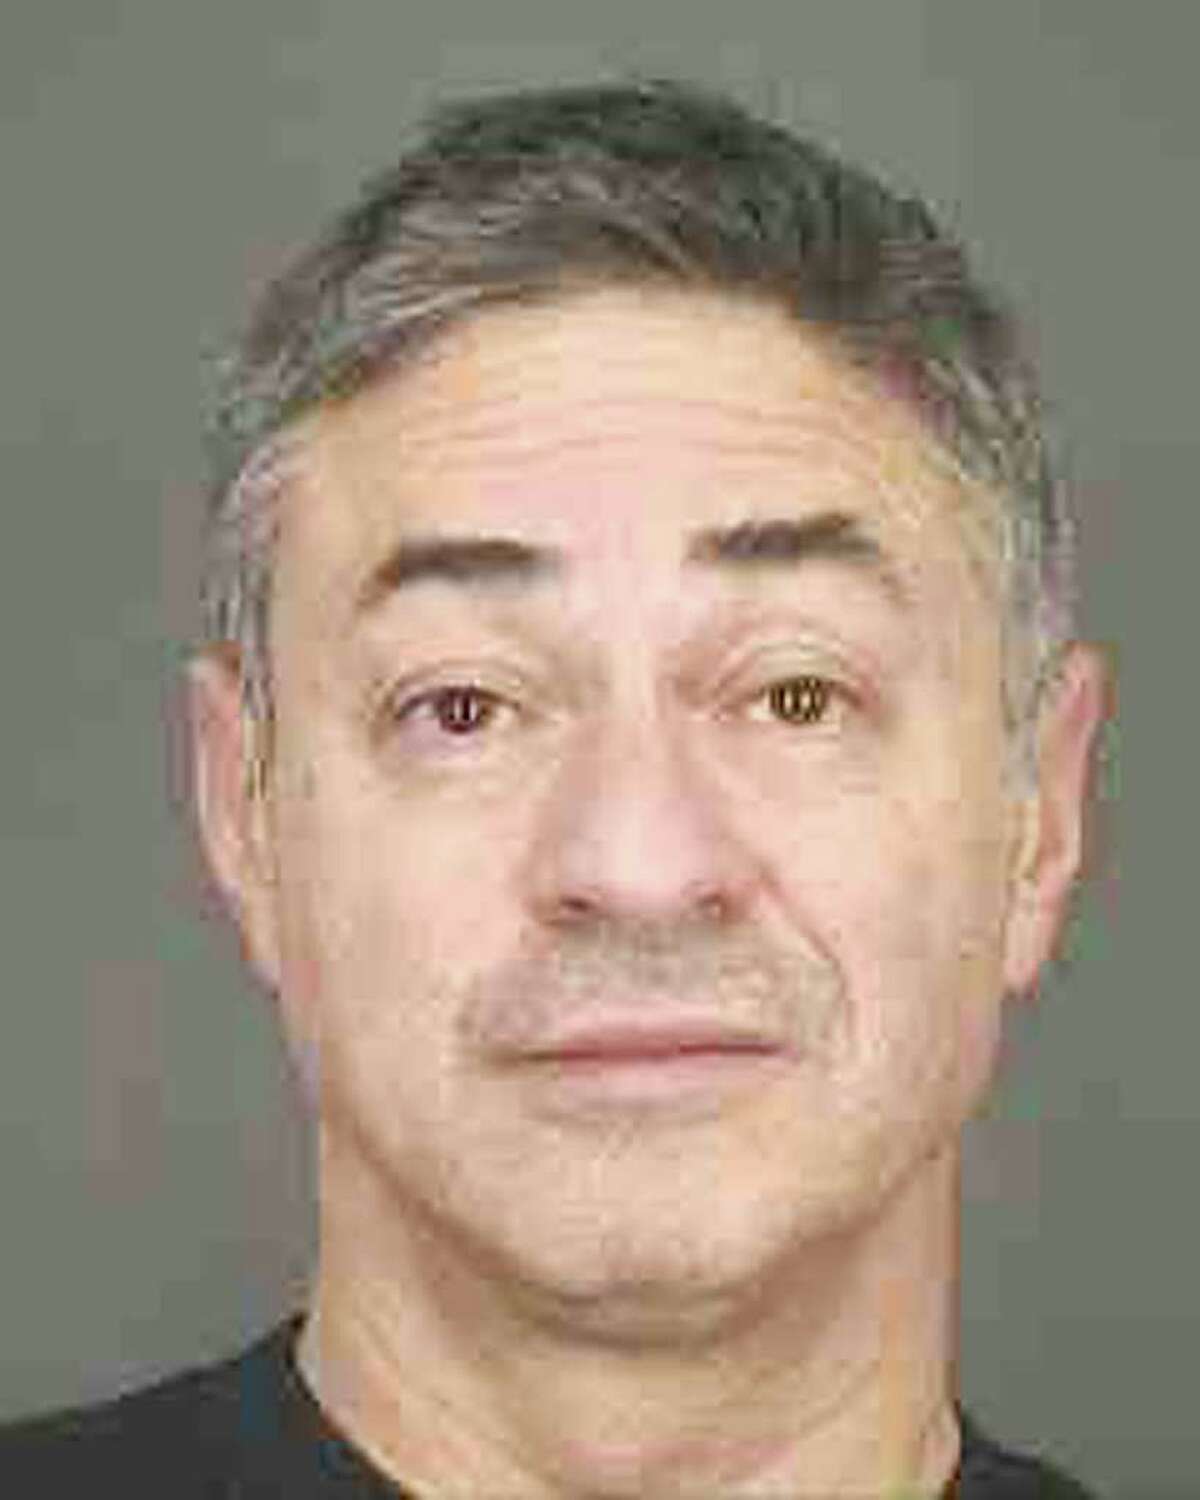 Clifford Berken, of Stamford, shown here in December 2008, is a former Greenwich internist who was required to register as a sex offender after pleading guilty to a sex crime in 2010. Berken will again be allowed to practice medicine in Connecticut, according to a recent decision by the state’s medical examining board. The decision regarding the status of Dr. Clifford Berken, 57, of Stamford, comes more than two years after the doctor engaged in sexually explicit online conversations with undercover officers posing as a teenage boy. Berken was arrested when he attempted to meet the boy in White Plains, N.Y., and was instead confronted by police. Berken pleaded guilty in February 2010 to the charge of attempting to disseminate indecent material to a minor and was sentenced to five years of probation and classified as a sex offender in New York and Connecticut, where he currently lives.